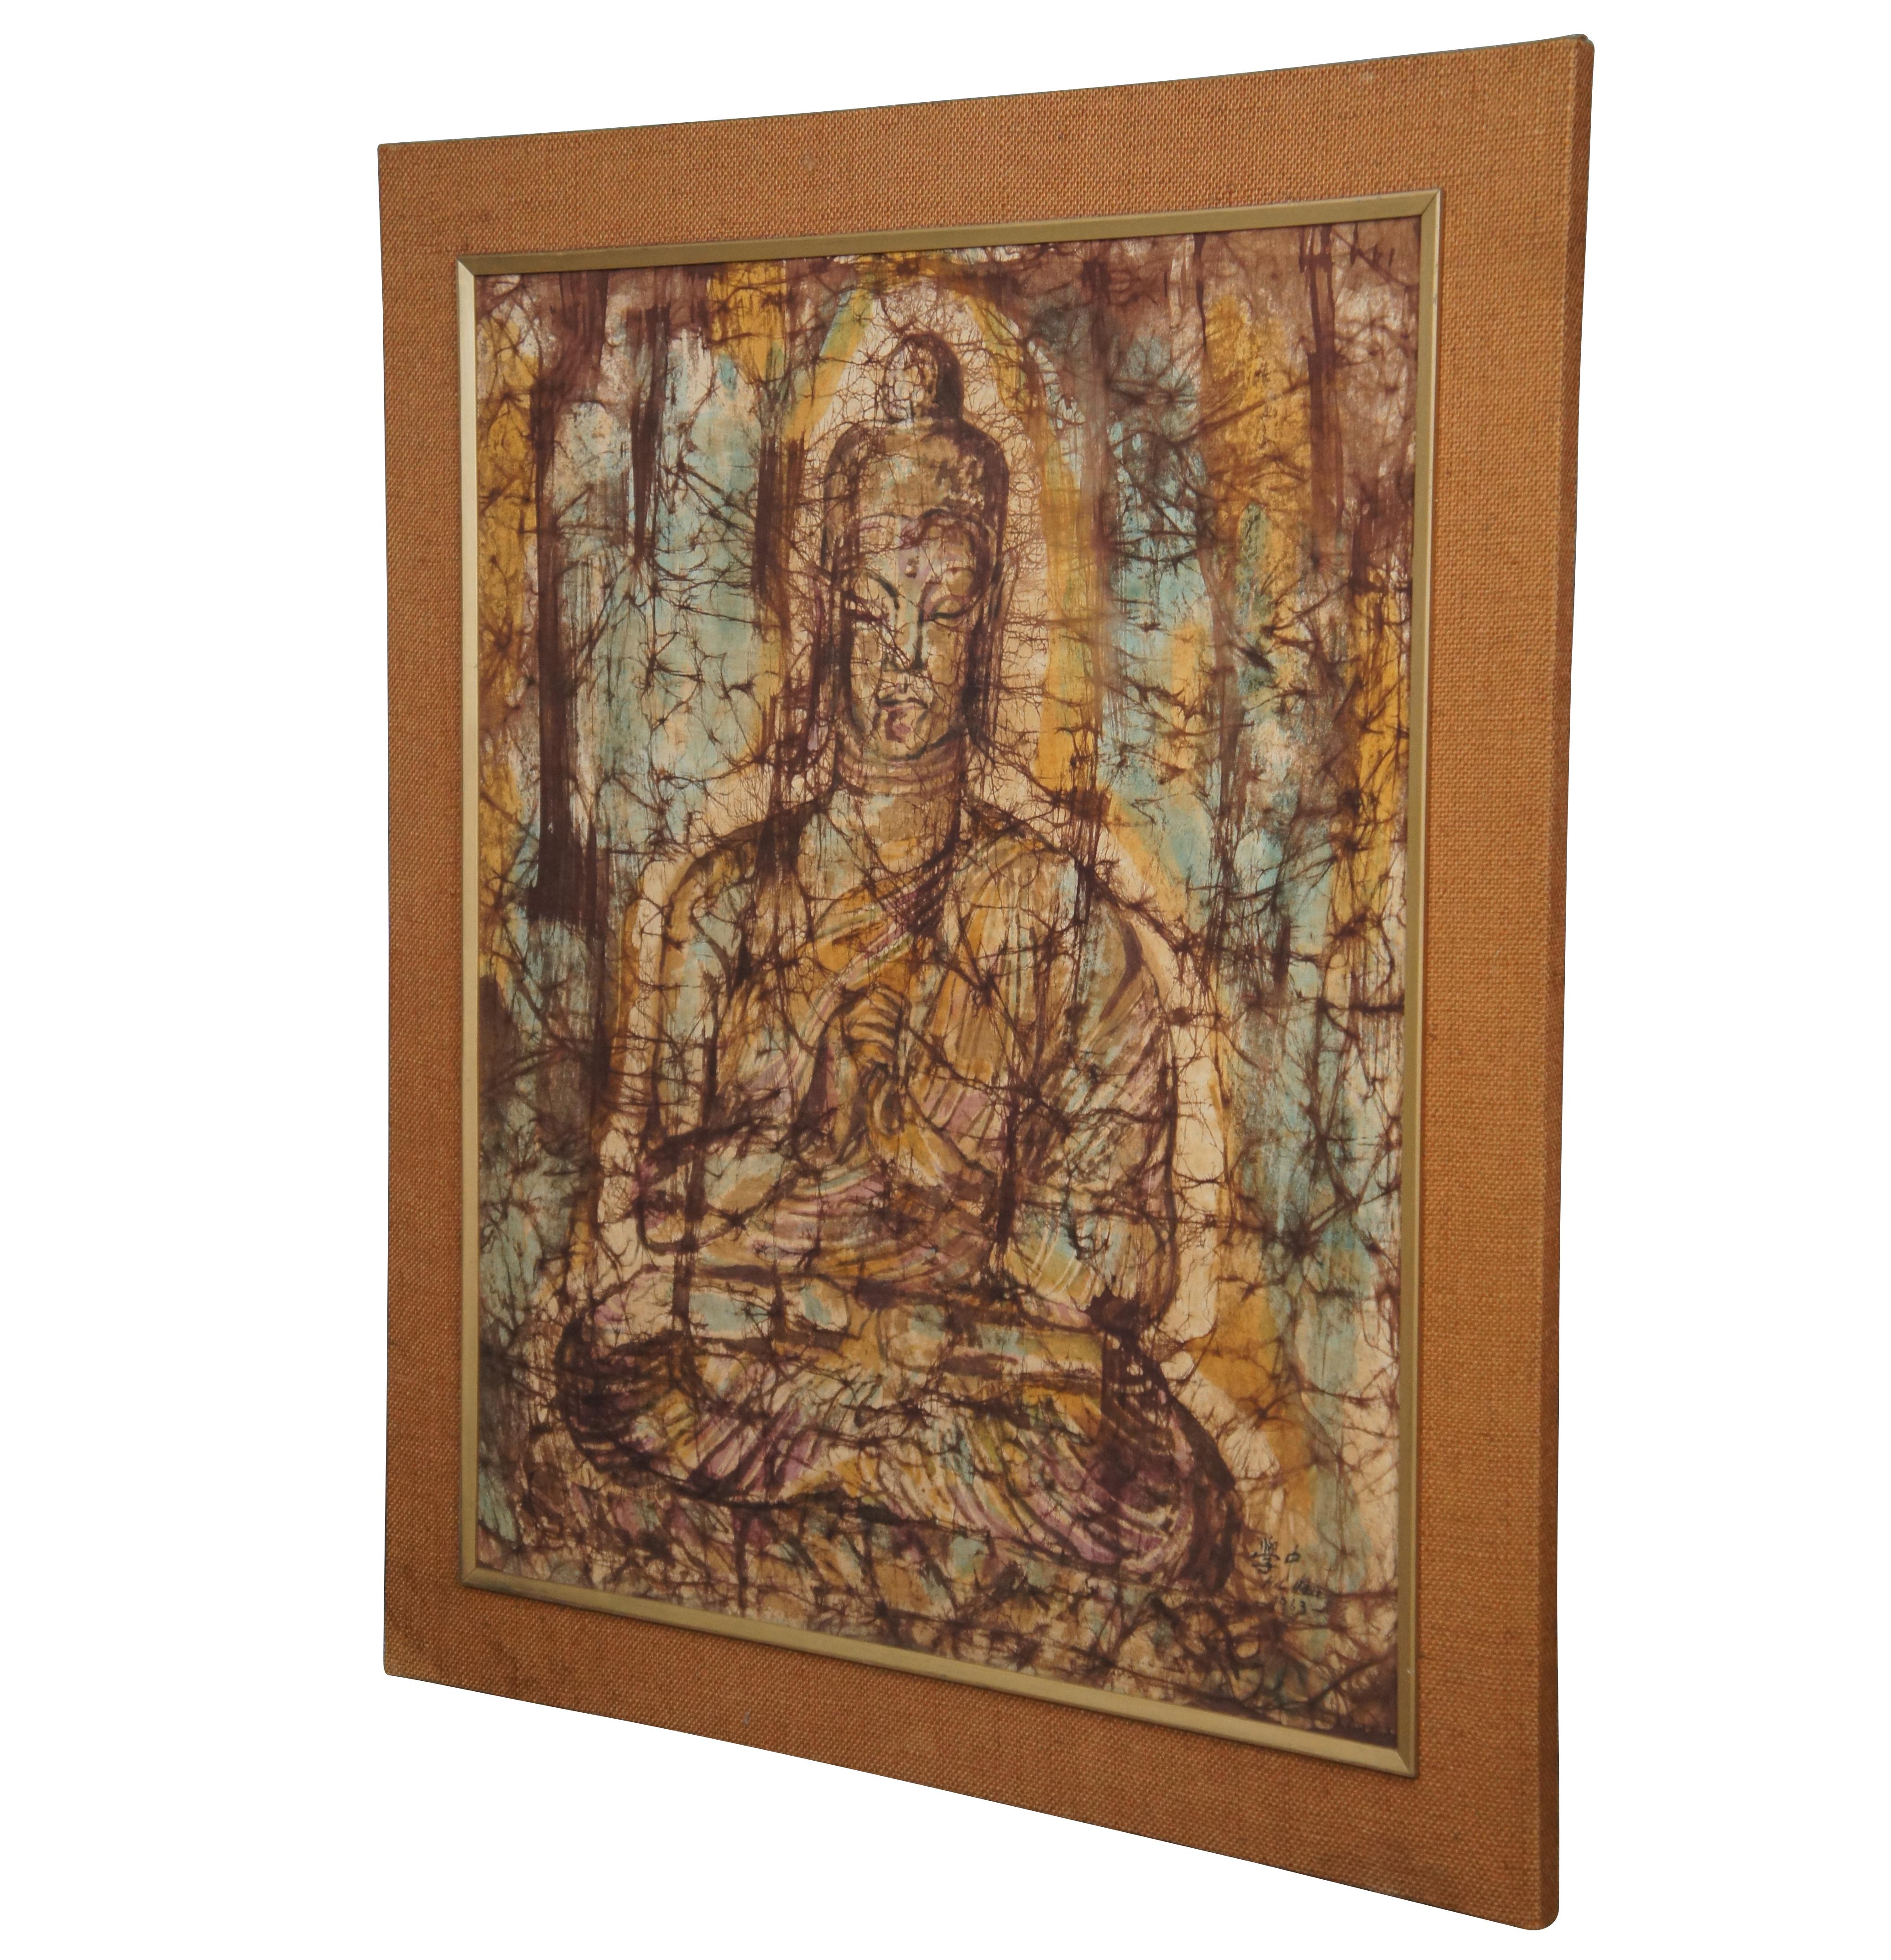 Midcentury painting on silk of a Sitting Buddha in turquoise, orange, pink and brown. Fukazen & Co and Magic Touch Art Gallery. Signed and dated 1963 in the lower left. Frame finished in rust orange burlap.

Measures: 34.5” x 1” x 41” / Sans Frame